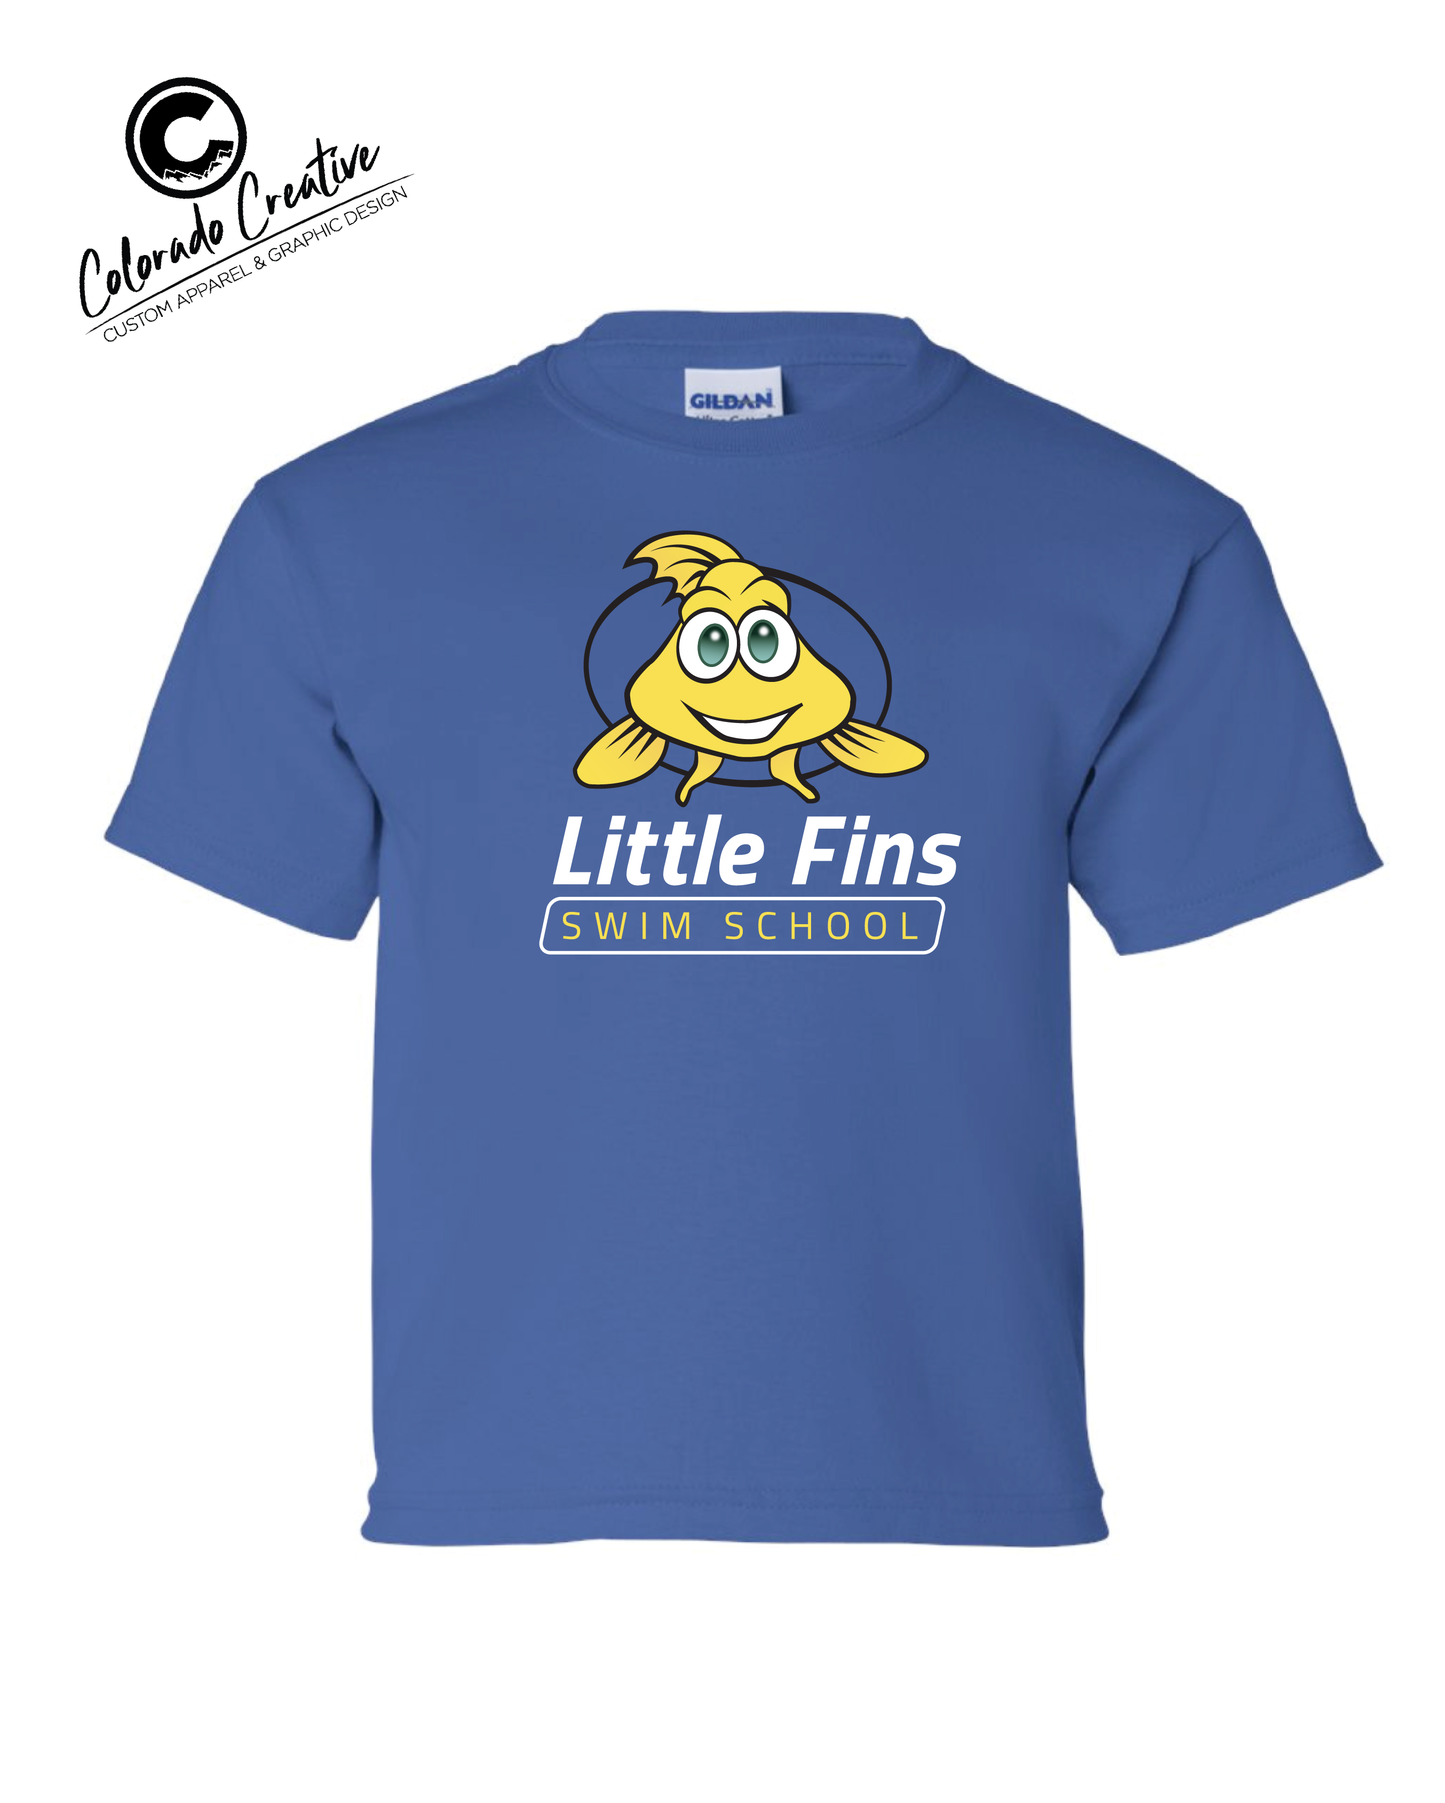 LITTLE FINS YOUTH TEE